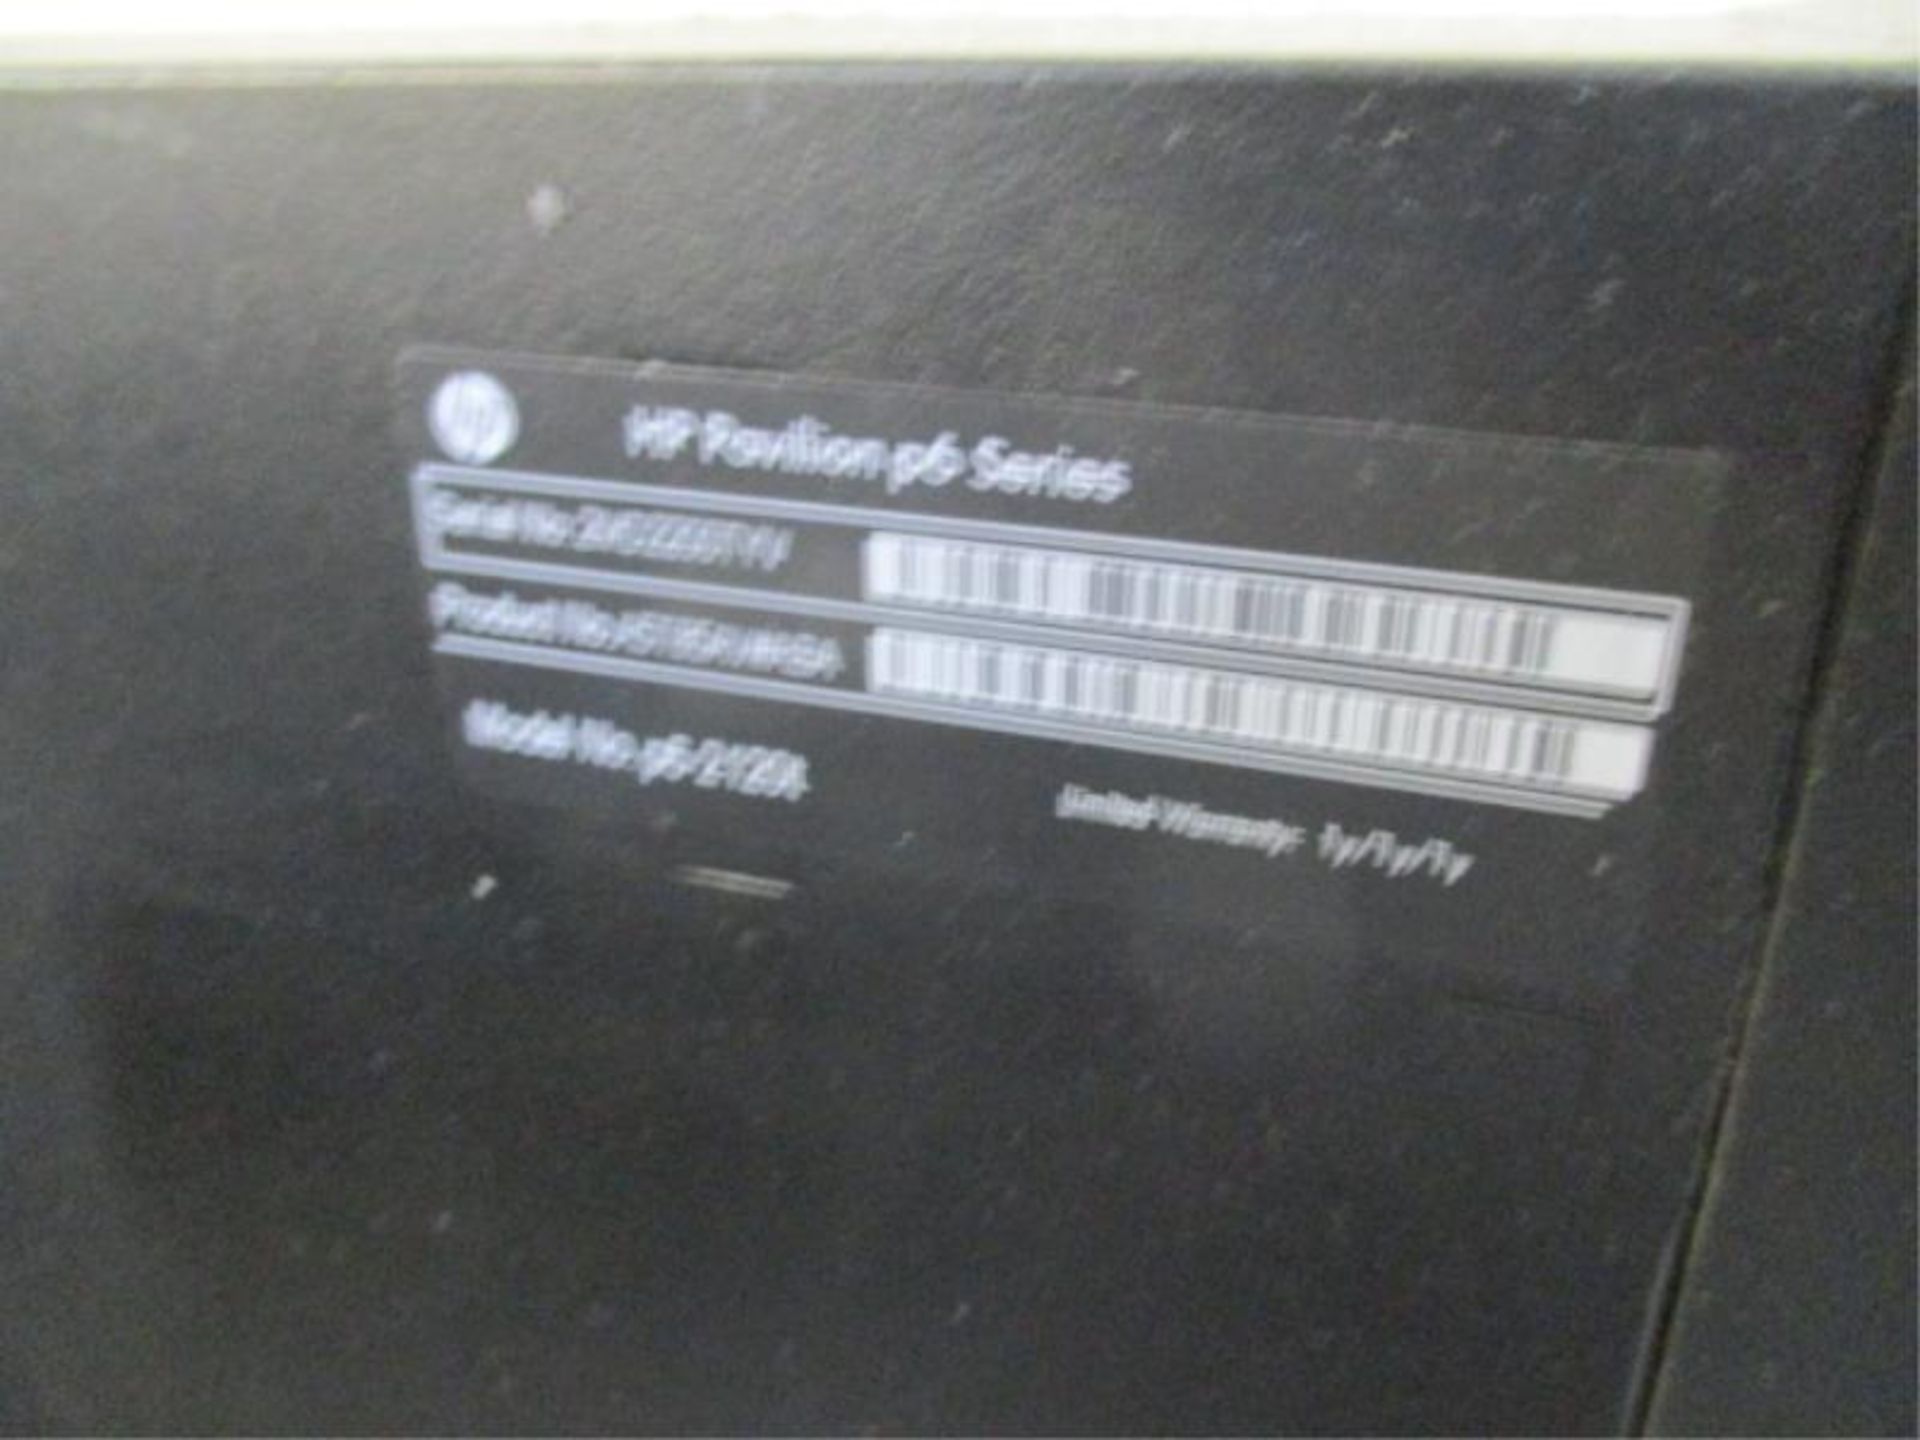 HP Pavilion PG Series, Windows 7 with 19 in Flat Screen monitor - Image 4 of 4